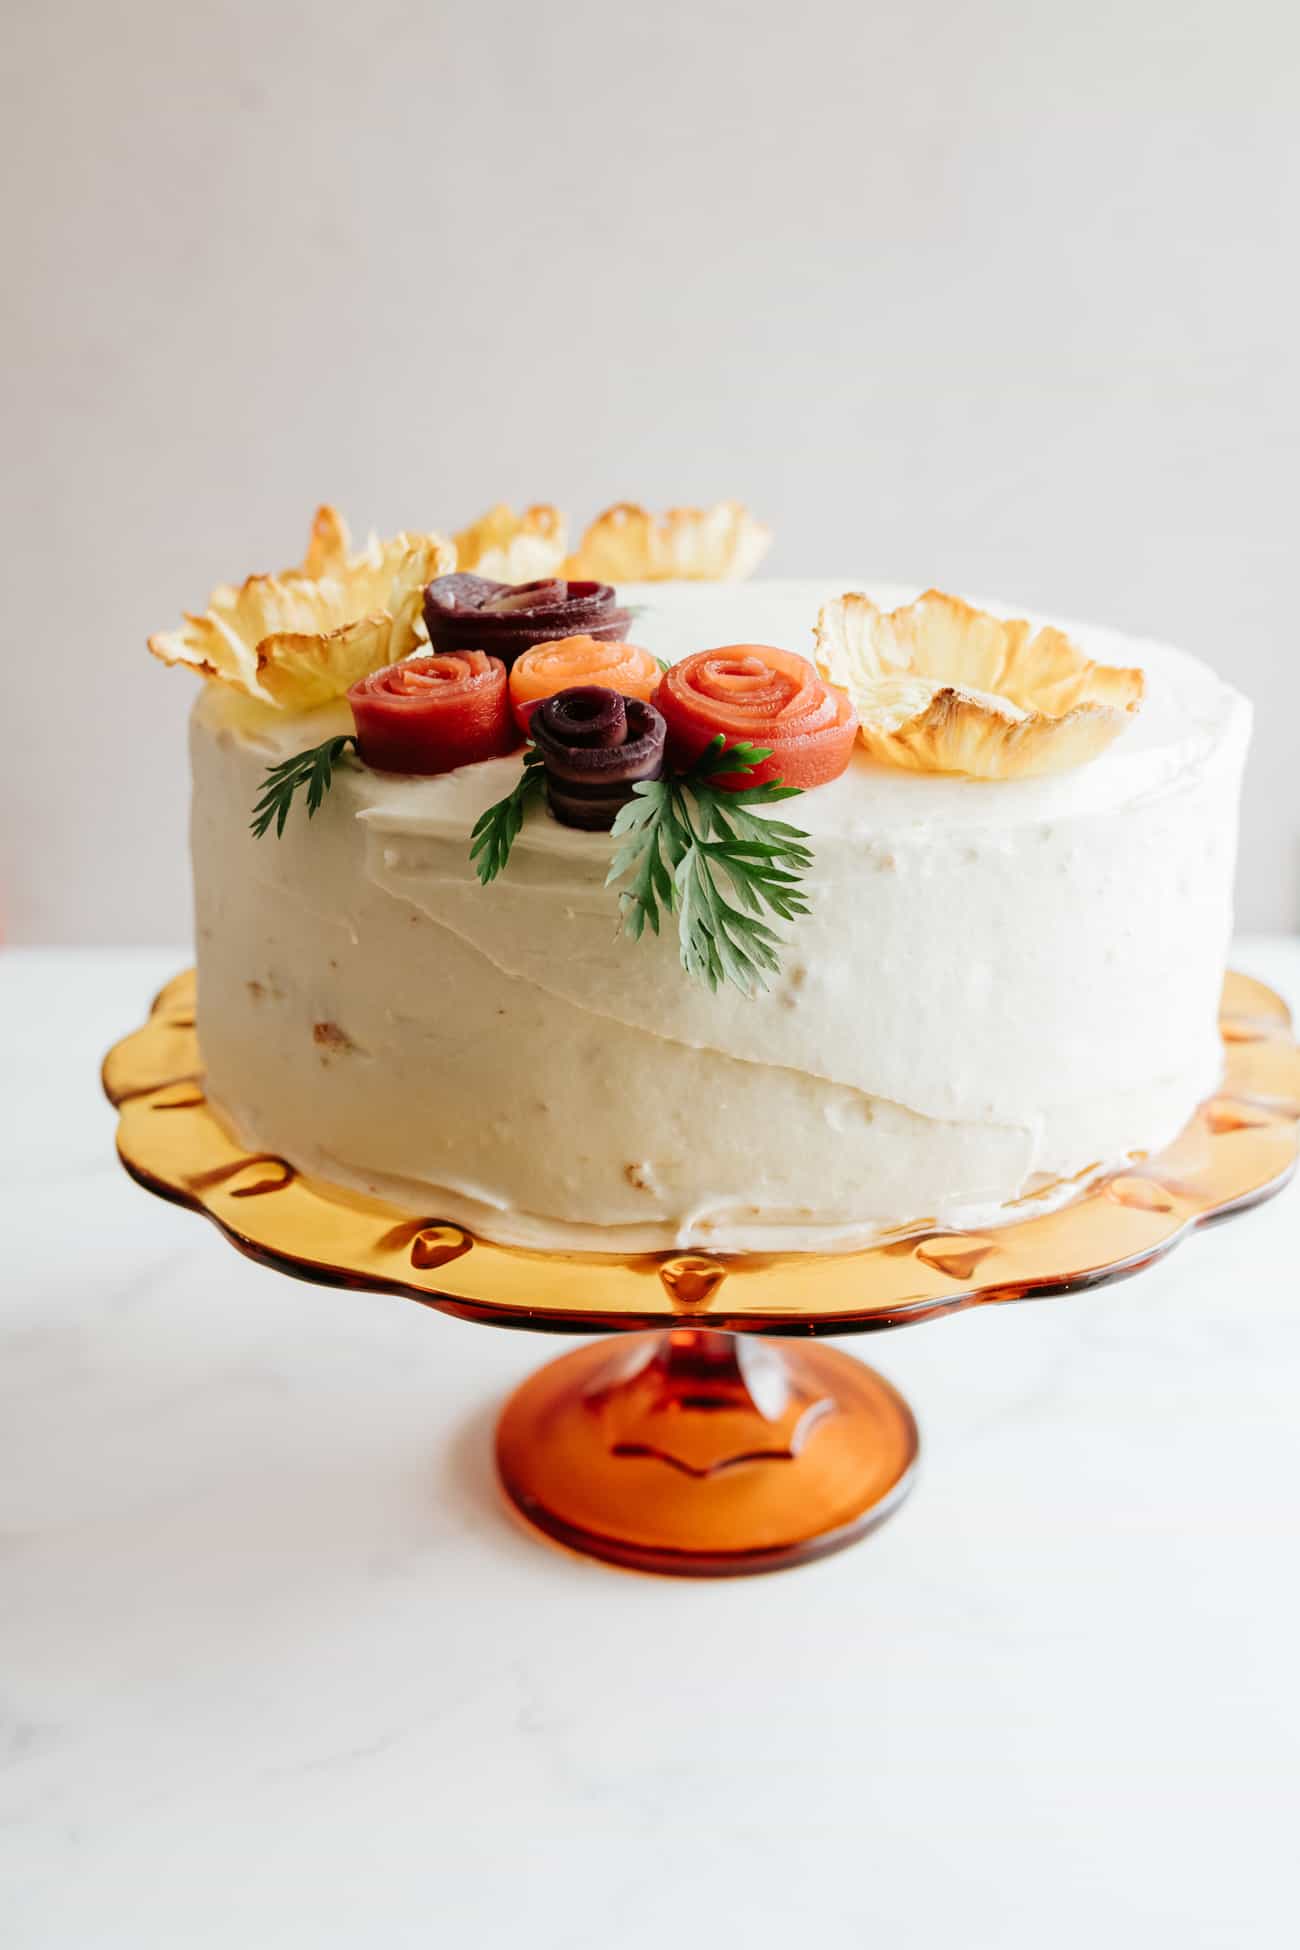 whole carrot cake decorated with pineapple flowers and rainbow carrot rosettes with carrot tops as green garnish.